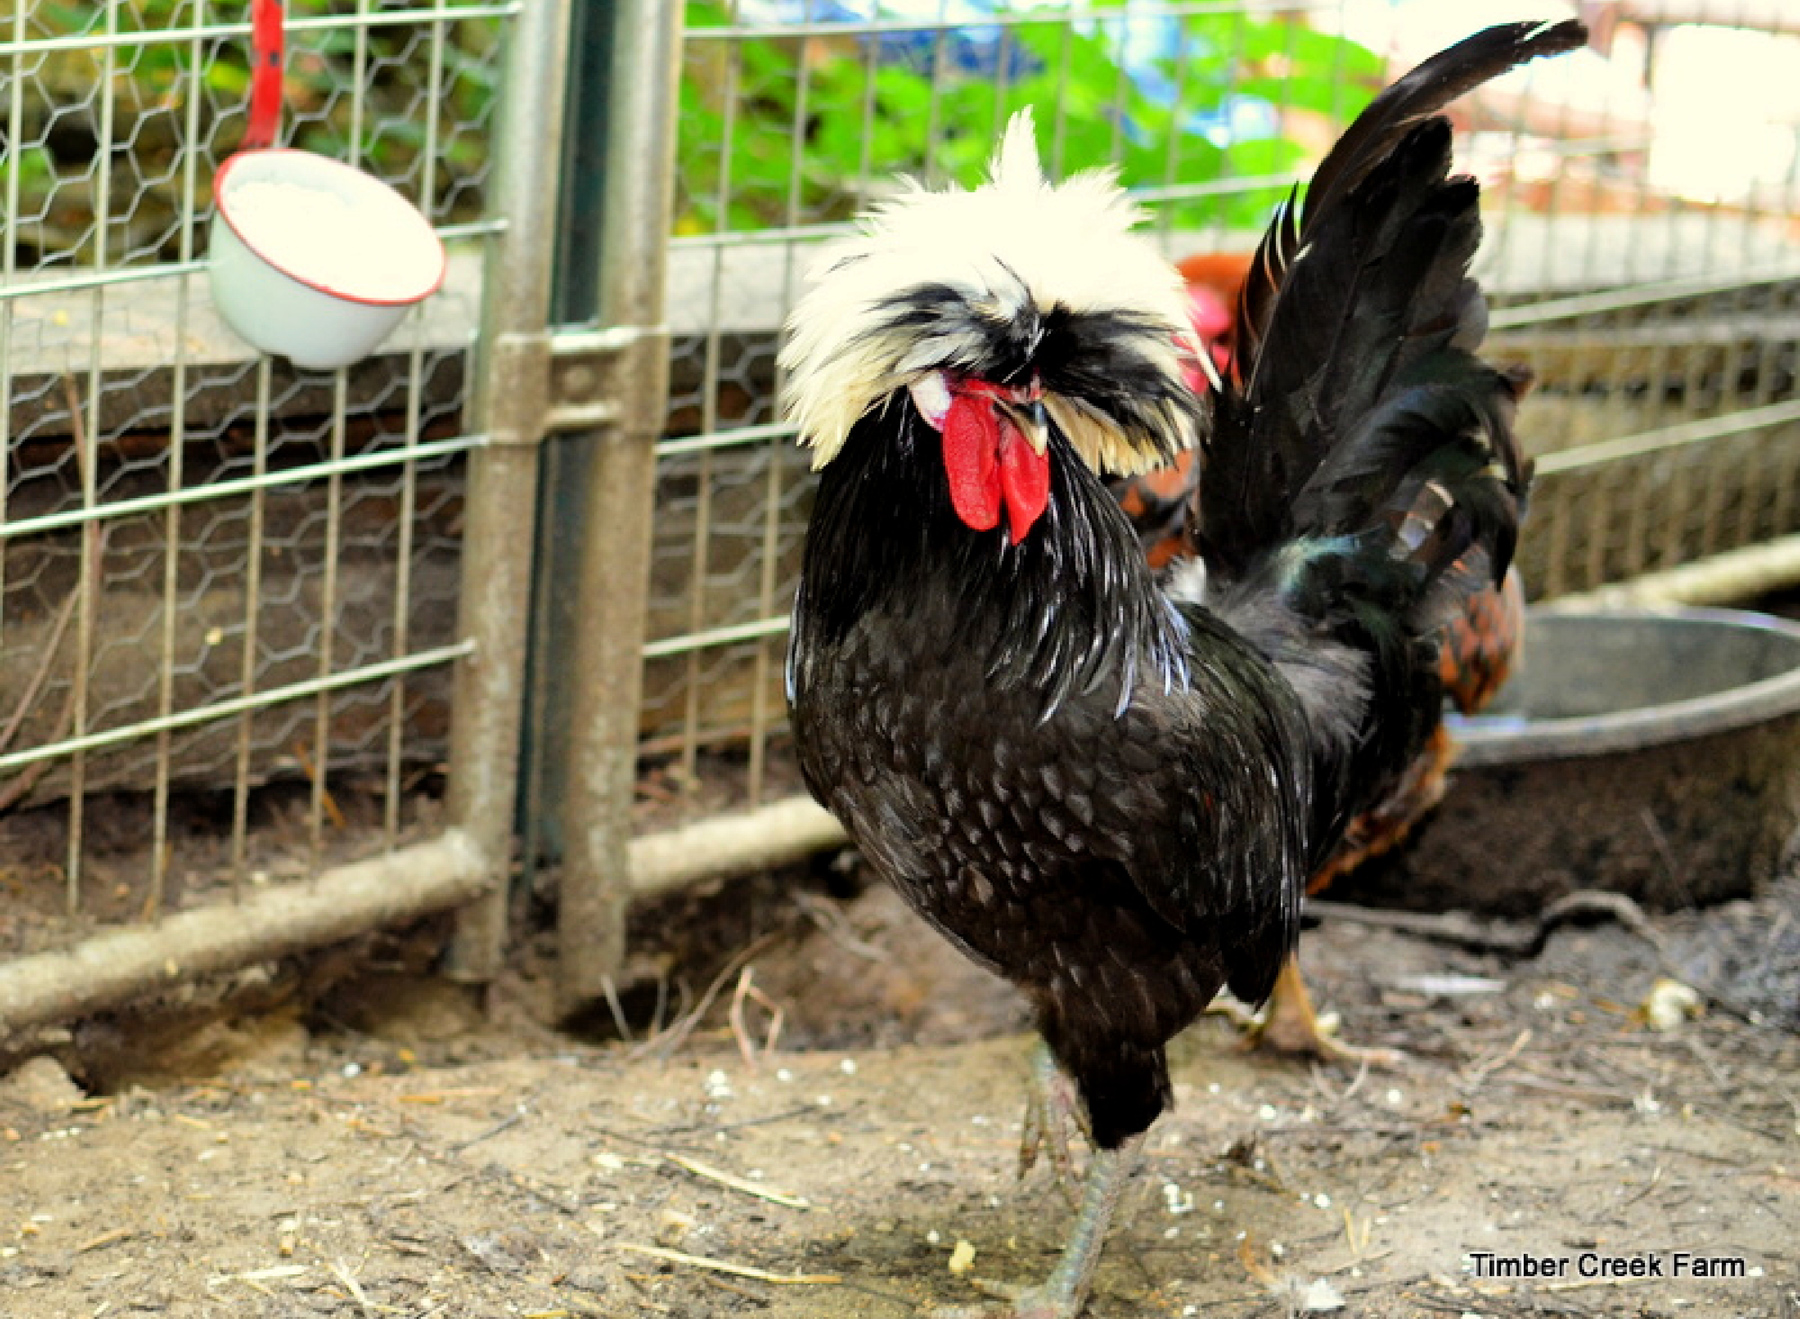 McMurray Hatchery Blog | The Beauty of Bantam Chickens | White Crested Black Polish